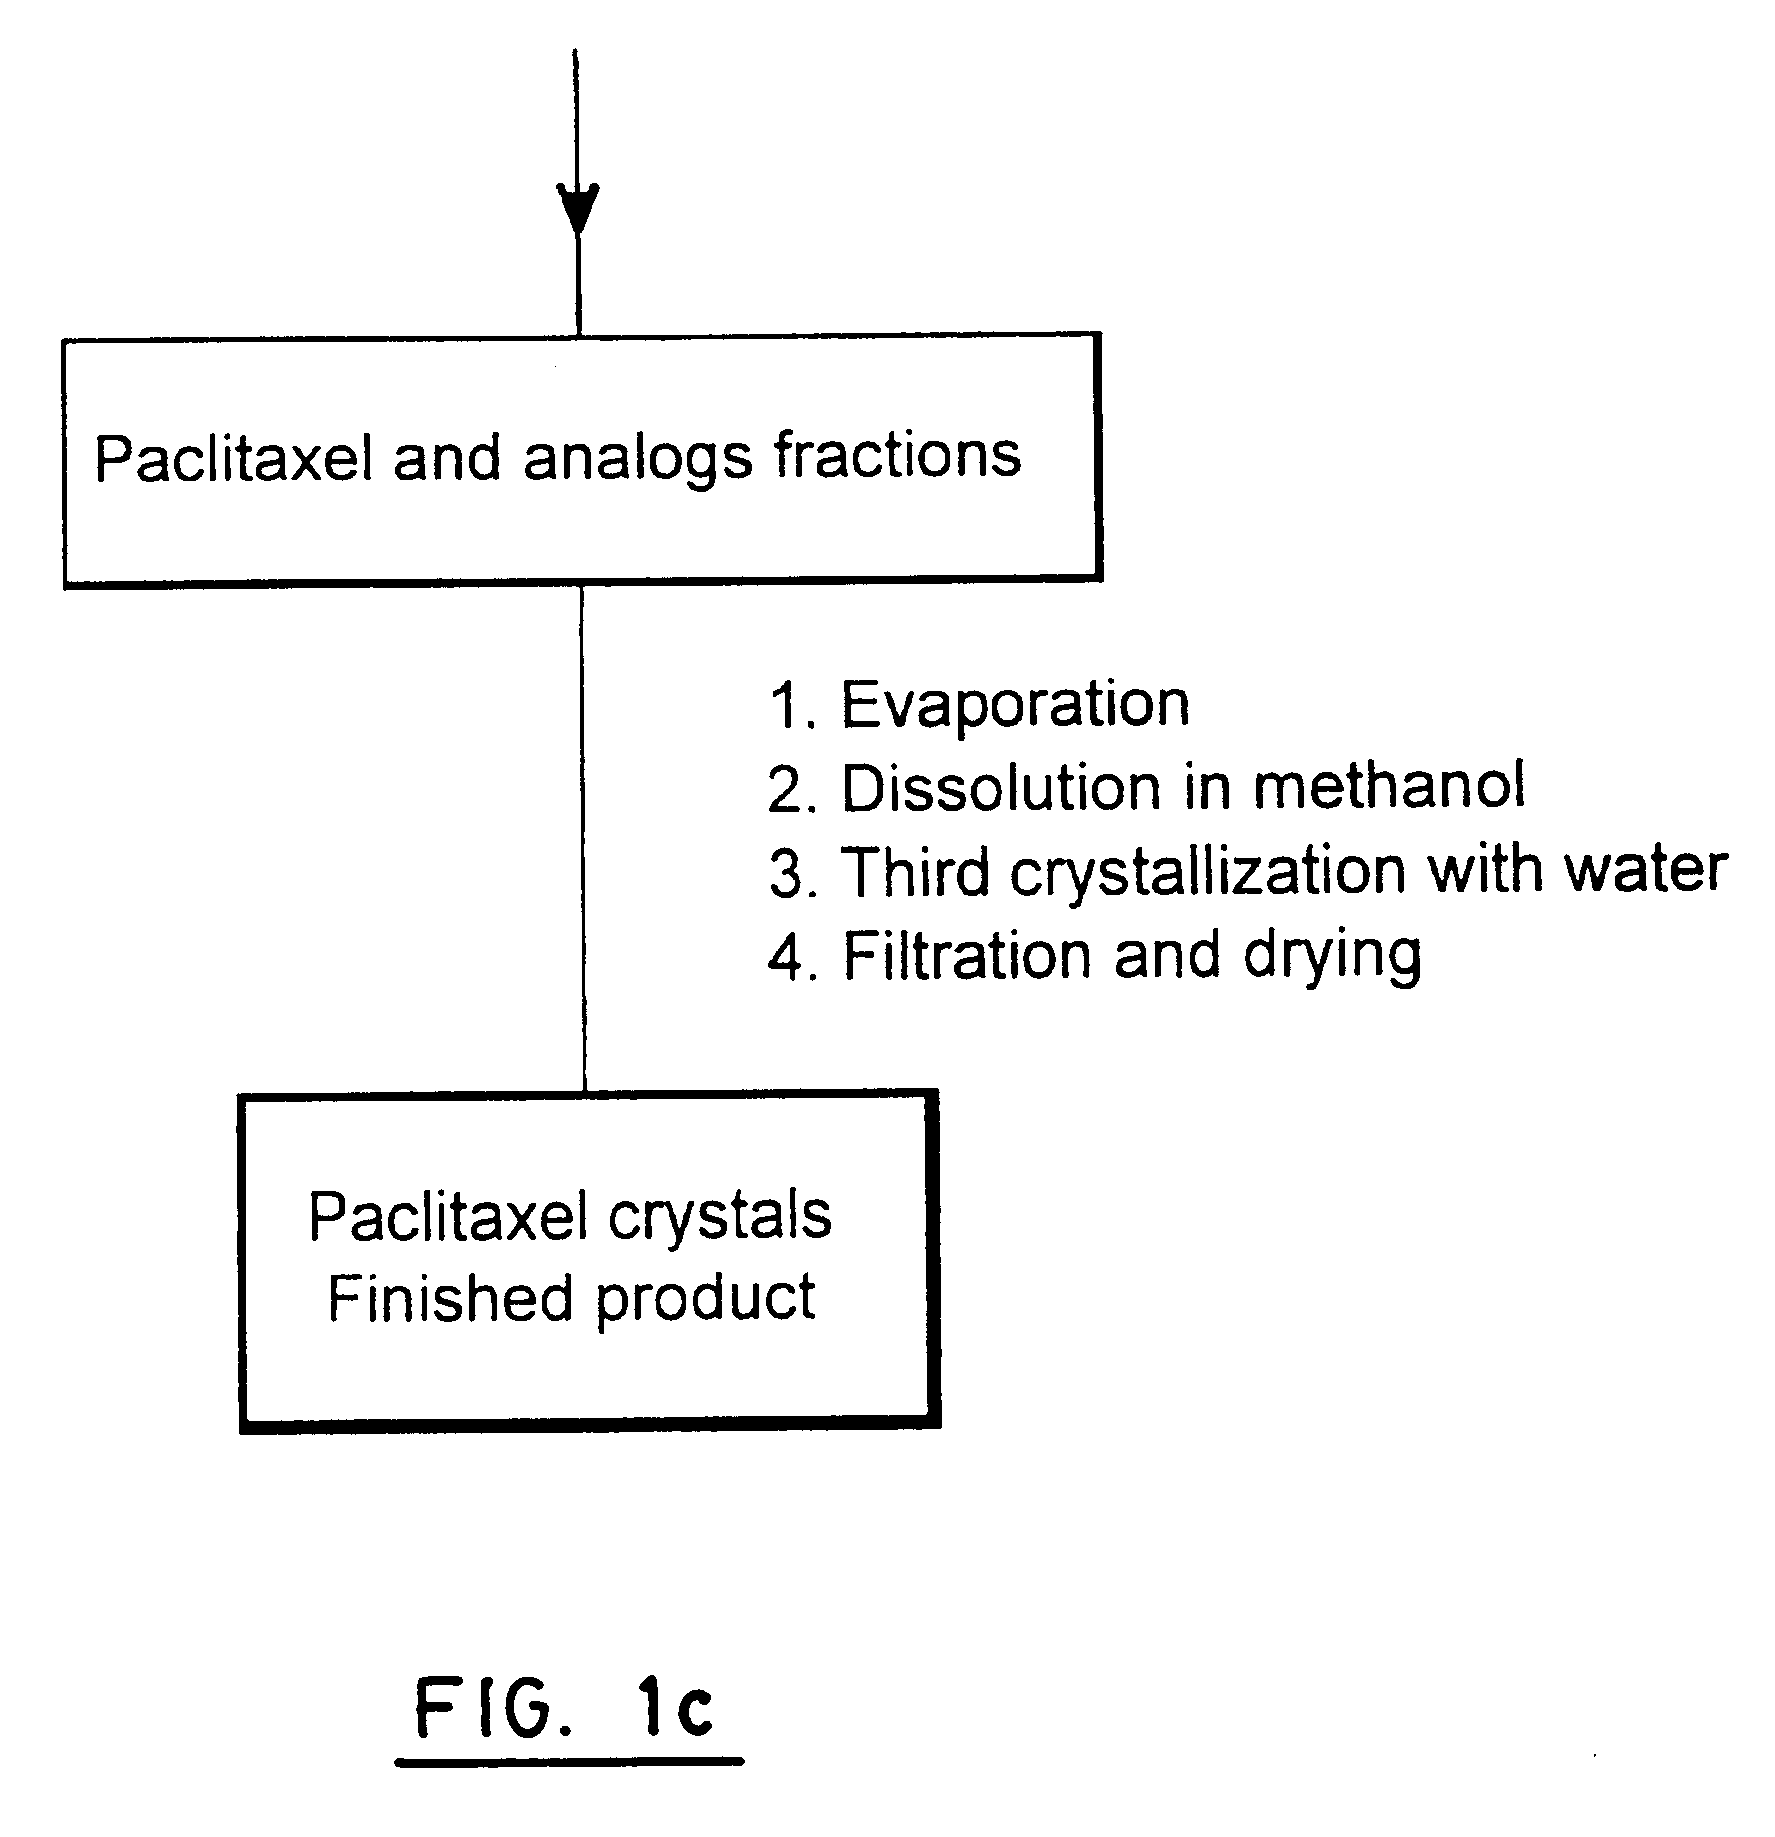 Process for extraction and purification of paclitaxel from natural sources